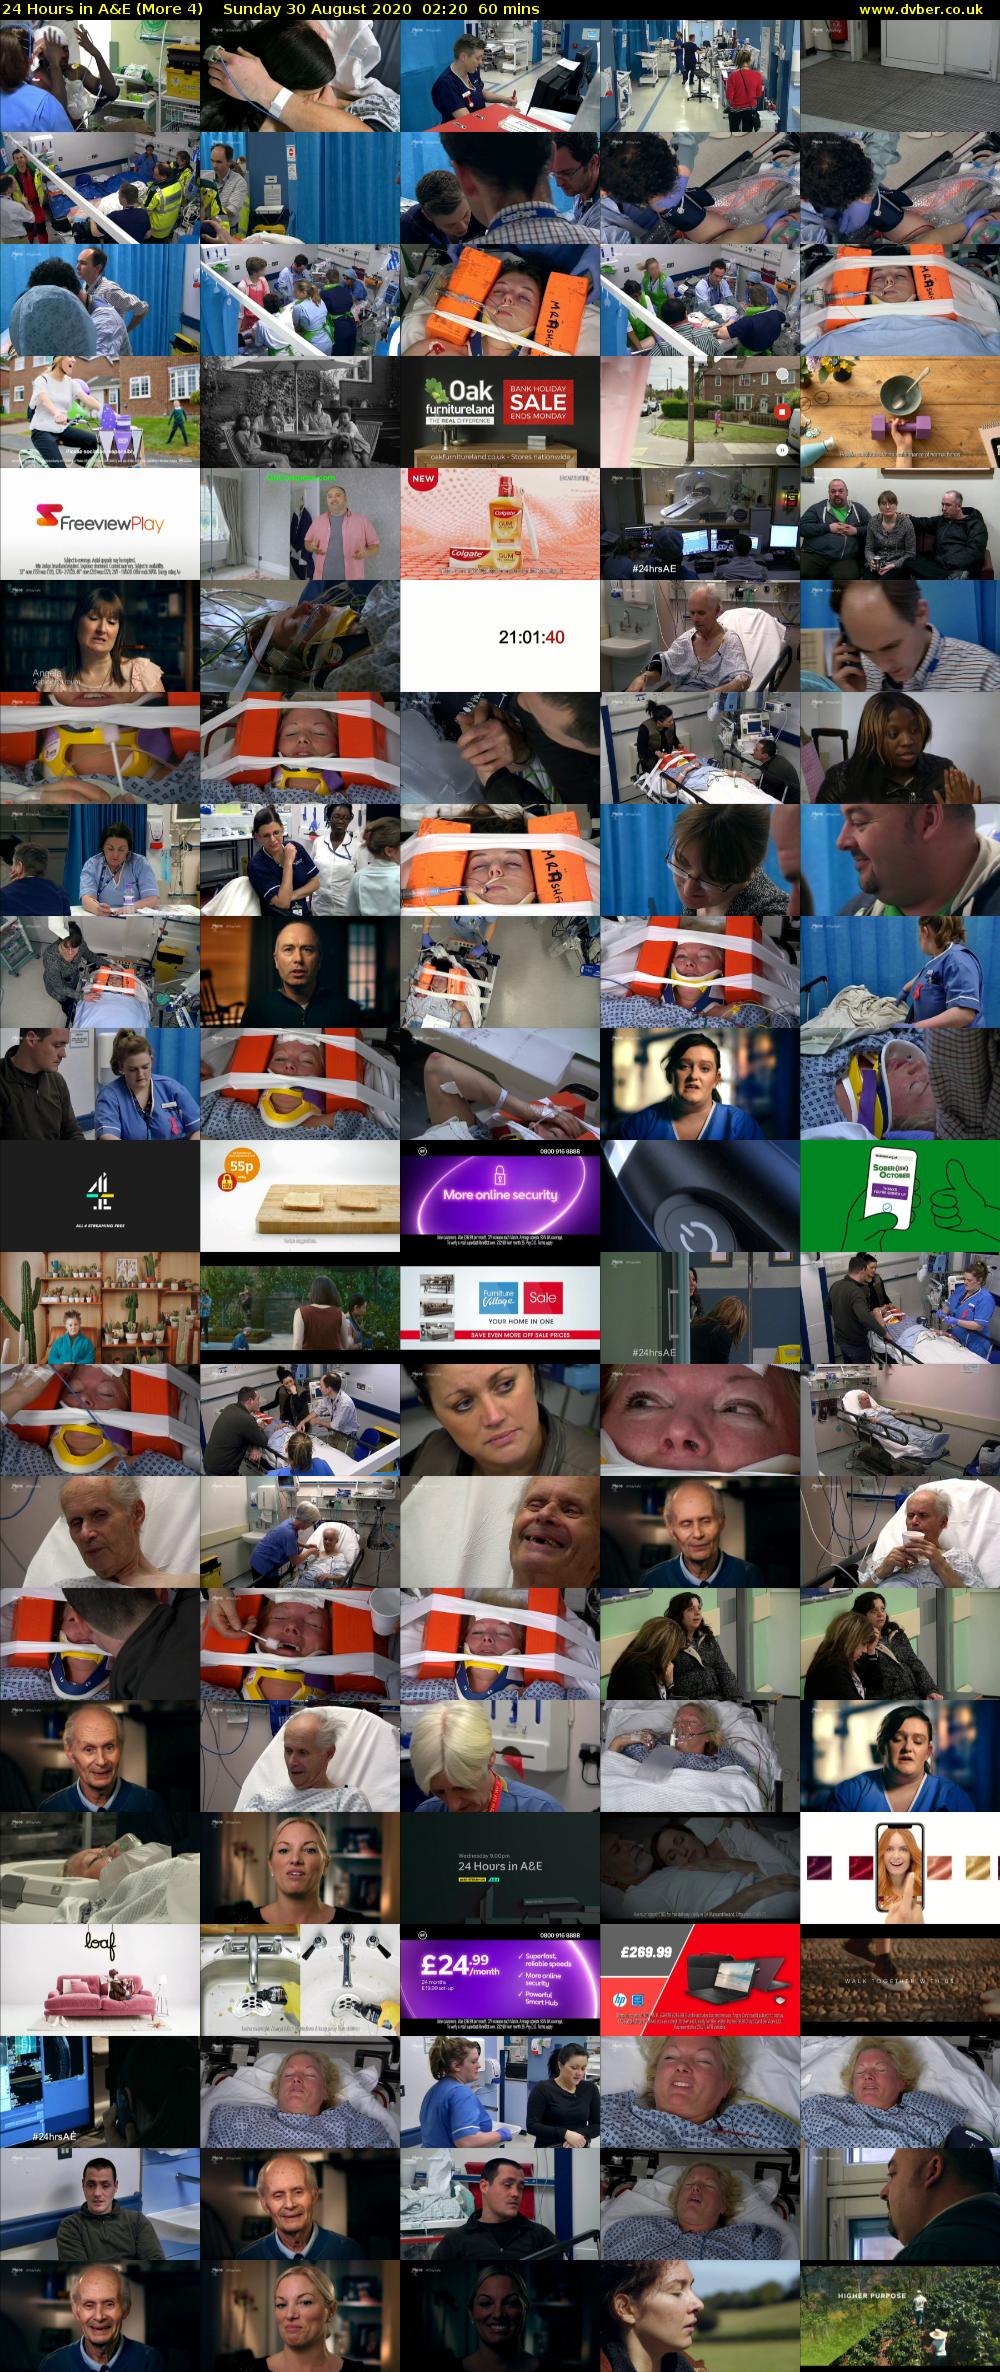 24 Hours in A&E (More 4) Sunday 30 August 2020 02:20 - 03:20